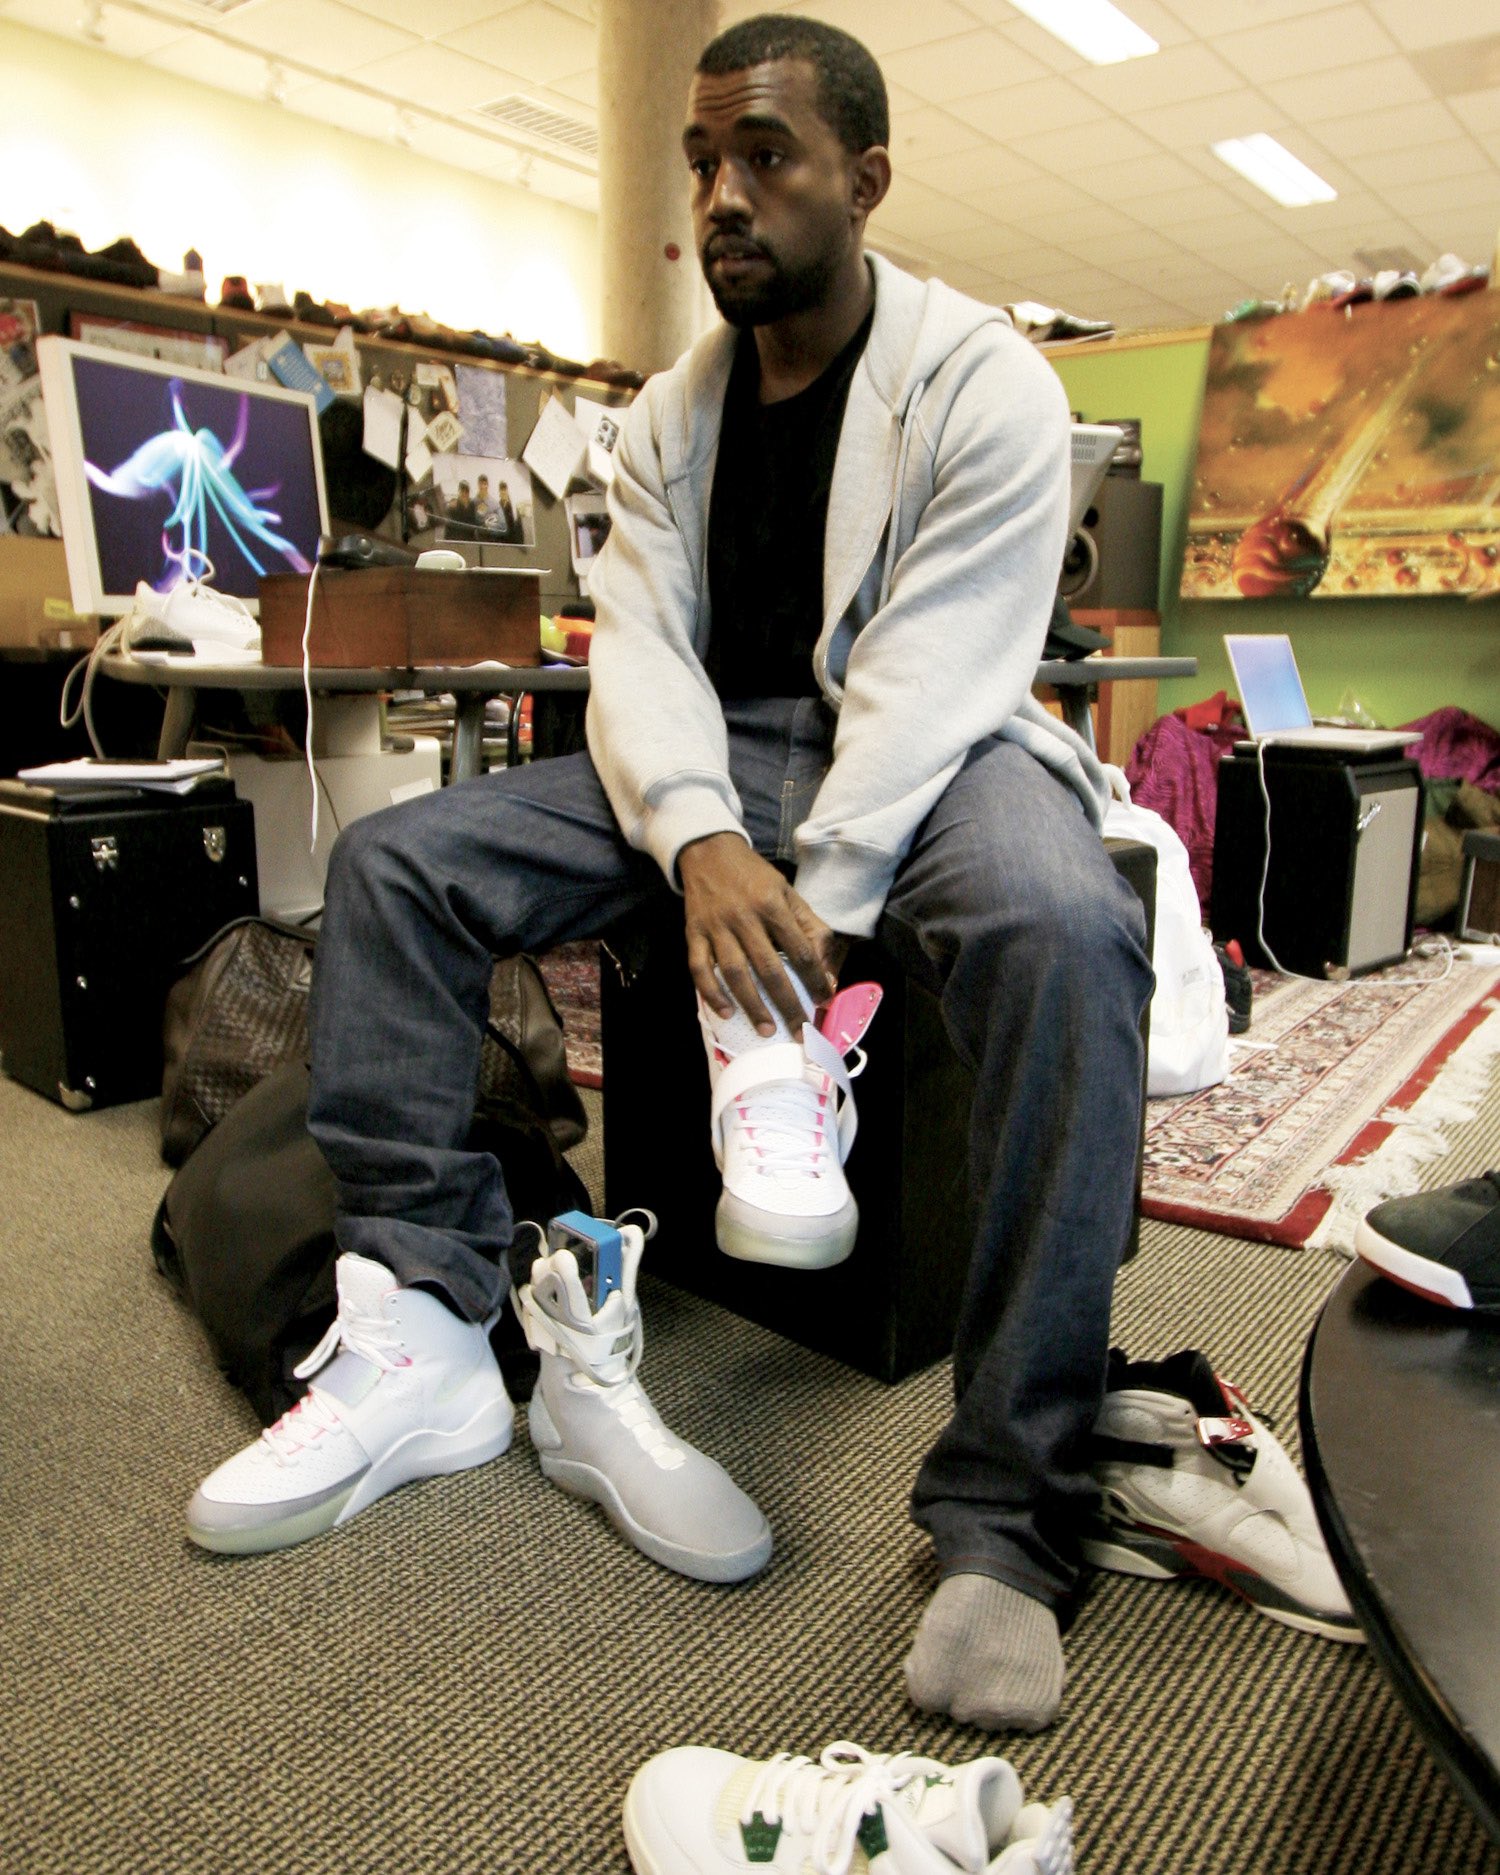 experimental equipaje Persona enferma Nick DePaula on Twitter: "The Yeezy 1 process... Went down memory lane and  pulled up some old 2007-2009 photos of Kanye working on his first Nike Air  Yeezy prototypes —&gt; https://t.co/n35jSQnZwv https://t.co/zhVE2Tyf6s" /